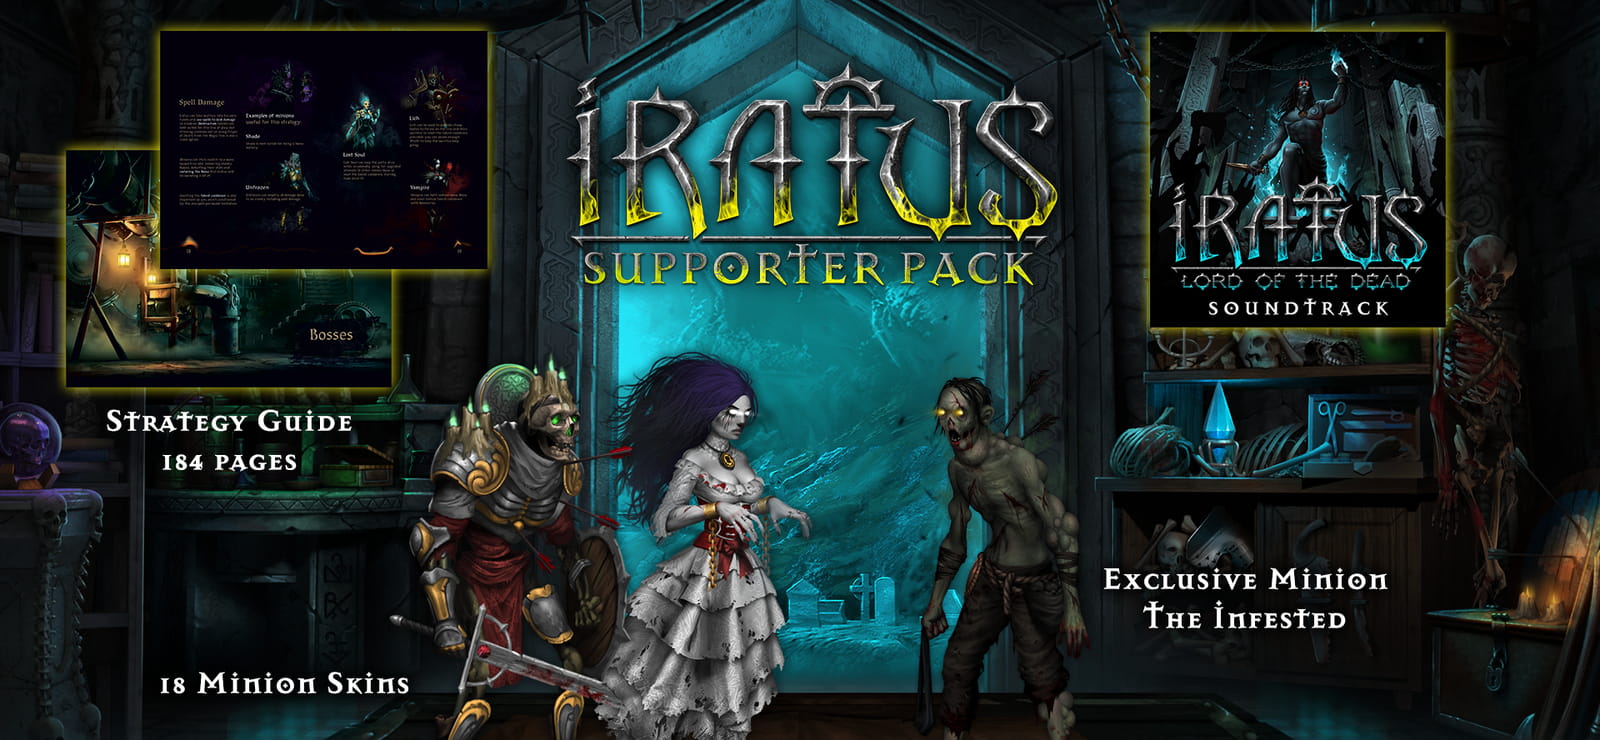 Iratus: Lord Of The Dead - Supporter Bundle